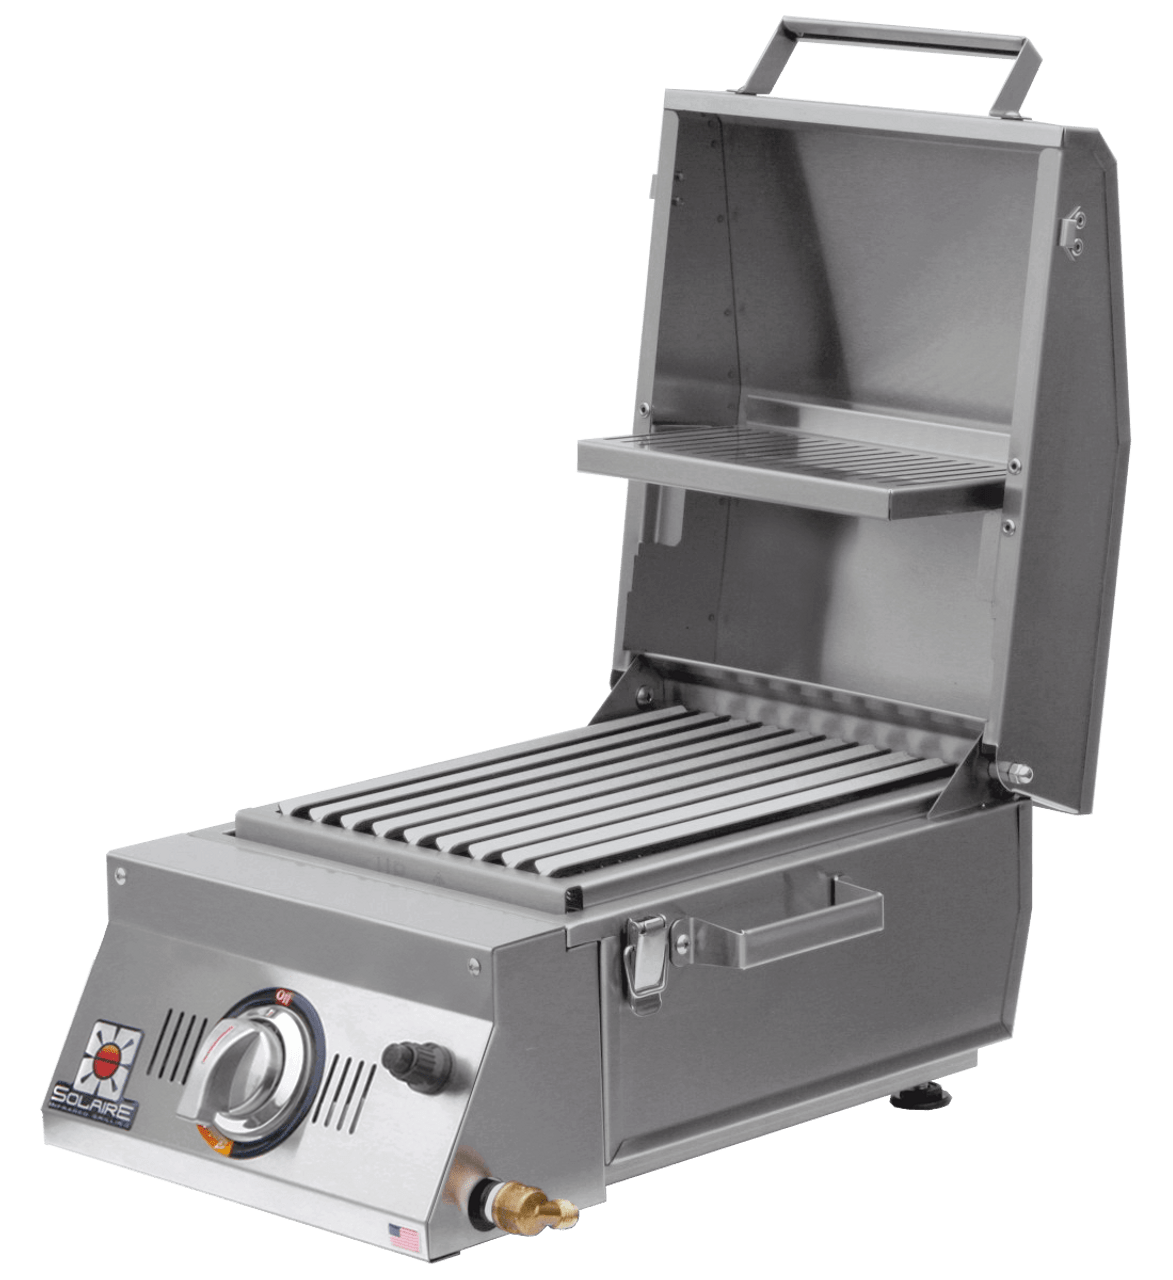 Solaire Demo Rental Grill